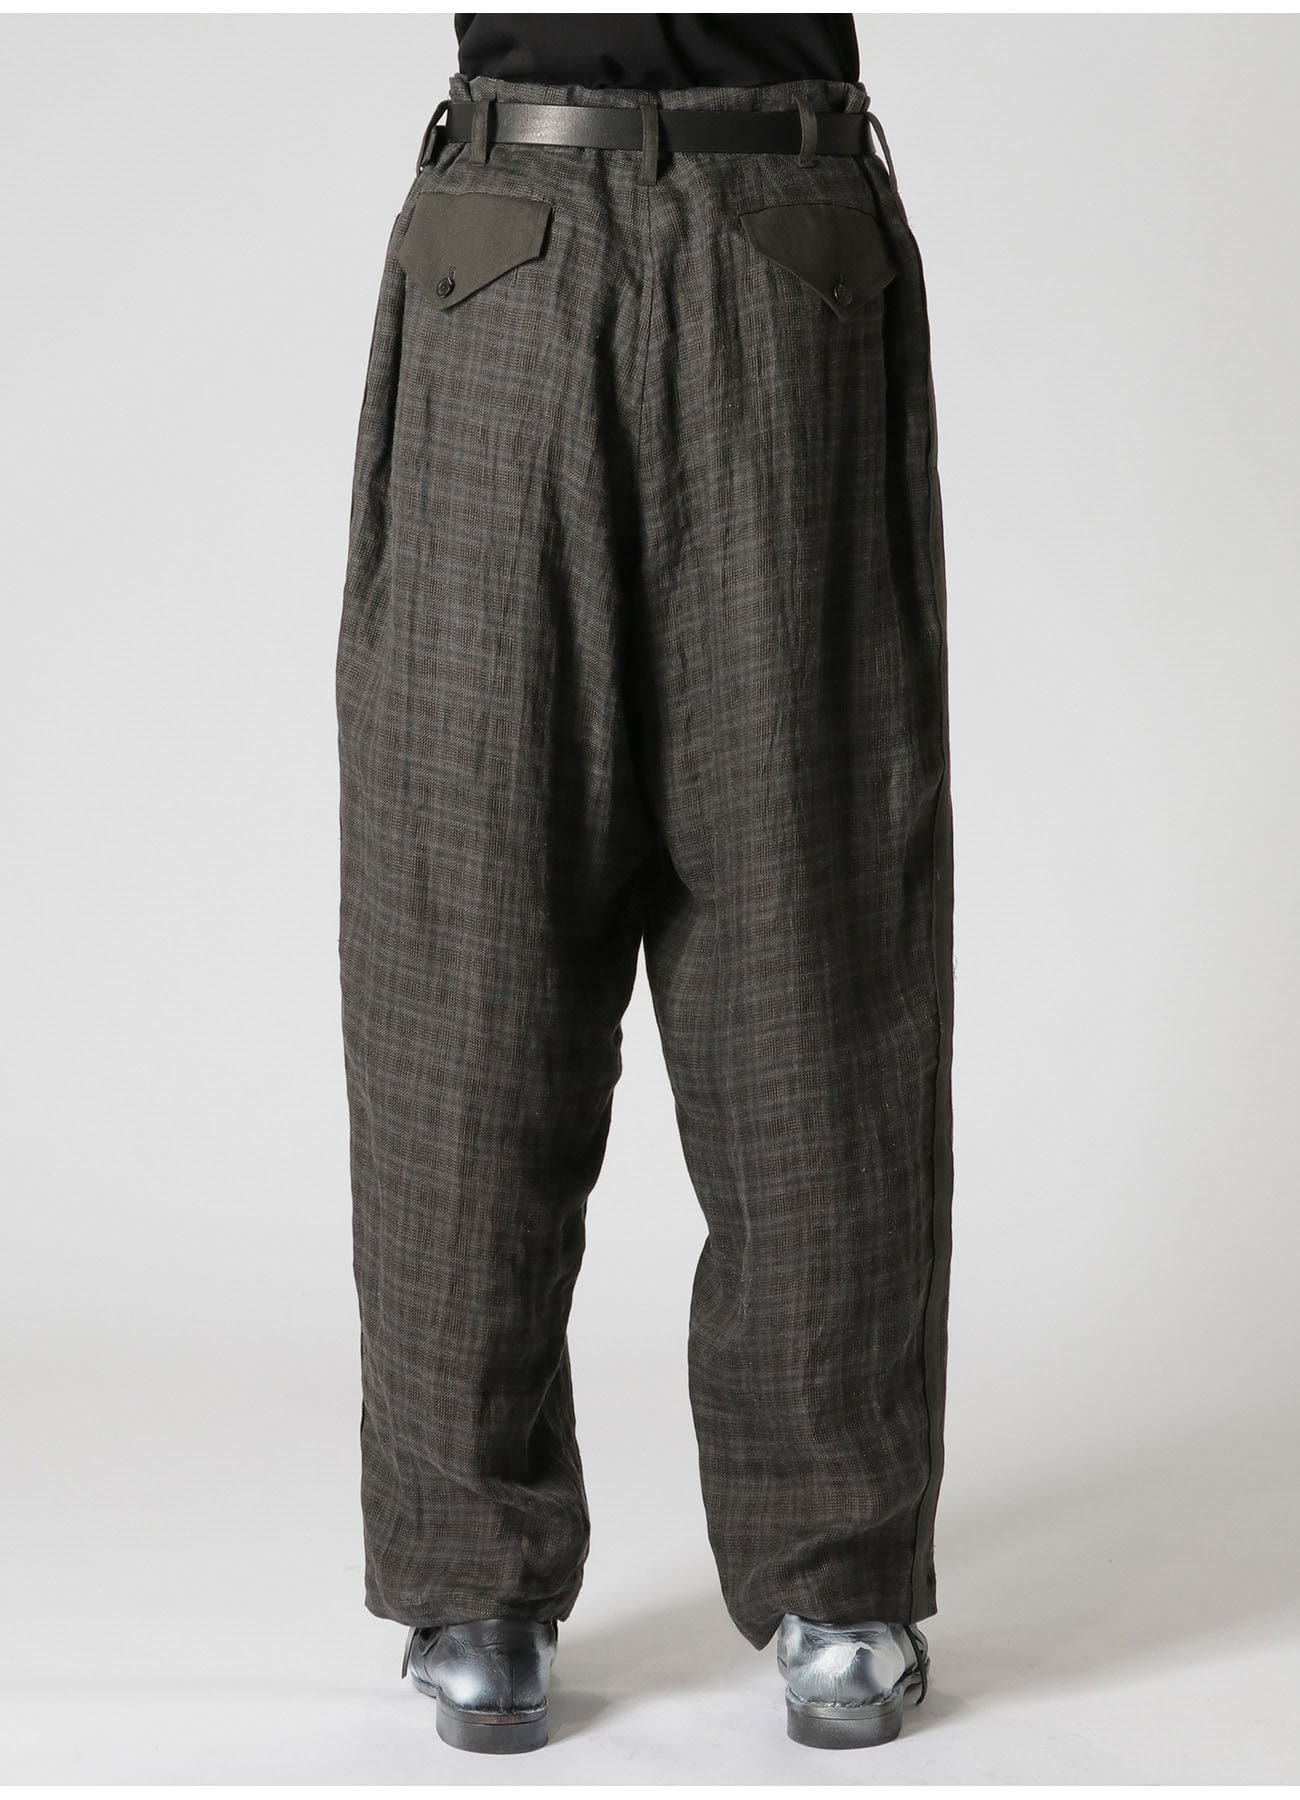 LINEN TWILL PLAID PANTS WITH SIDE TAPE